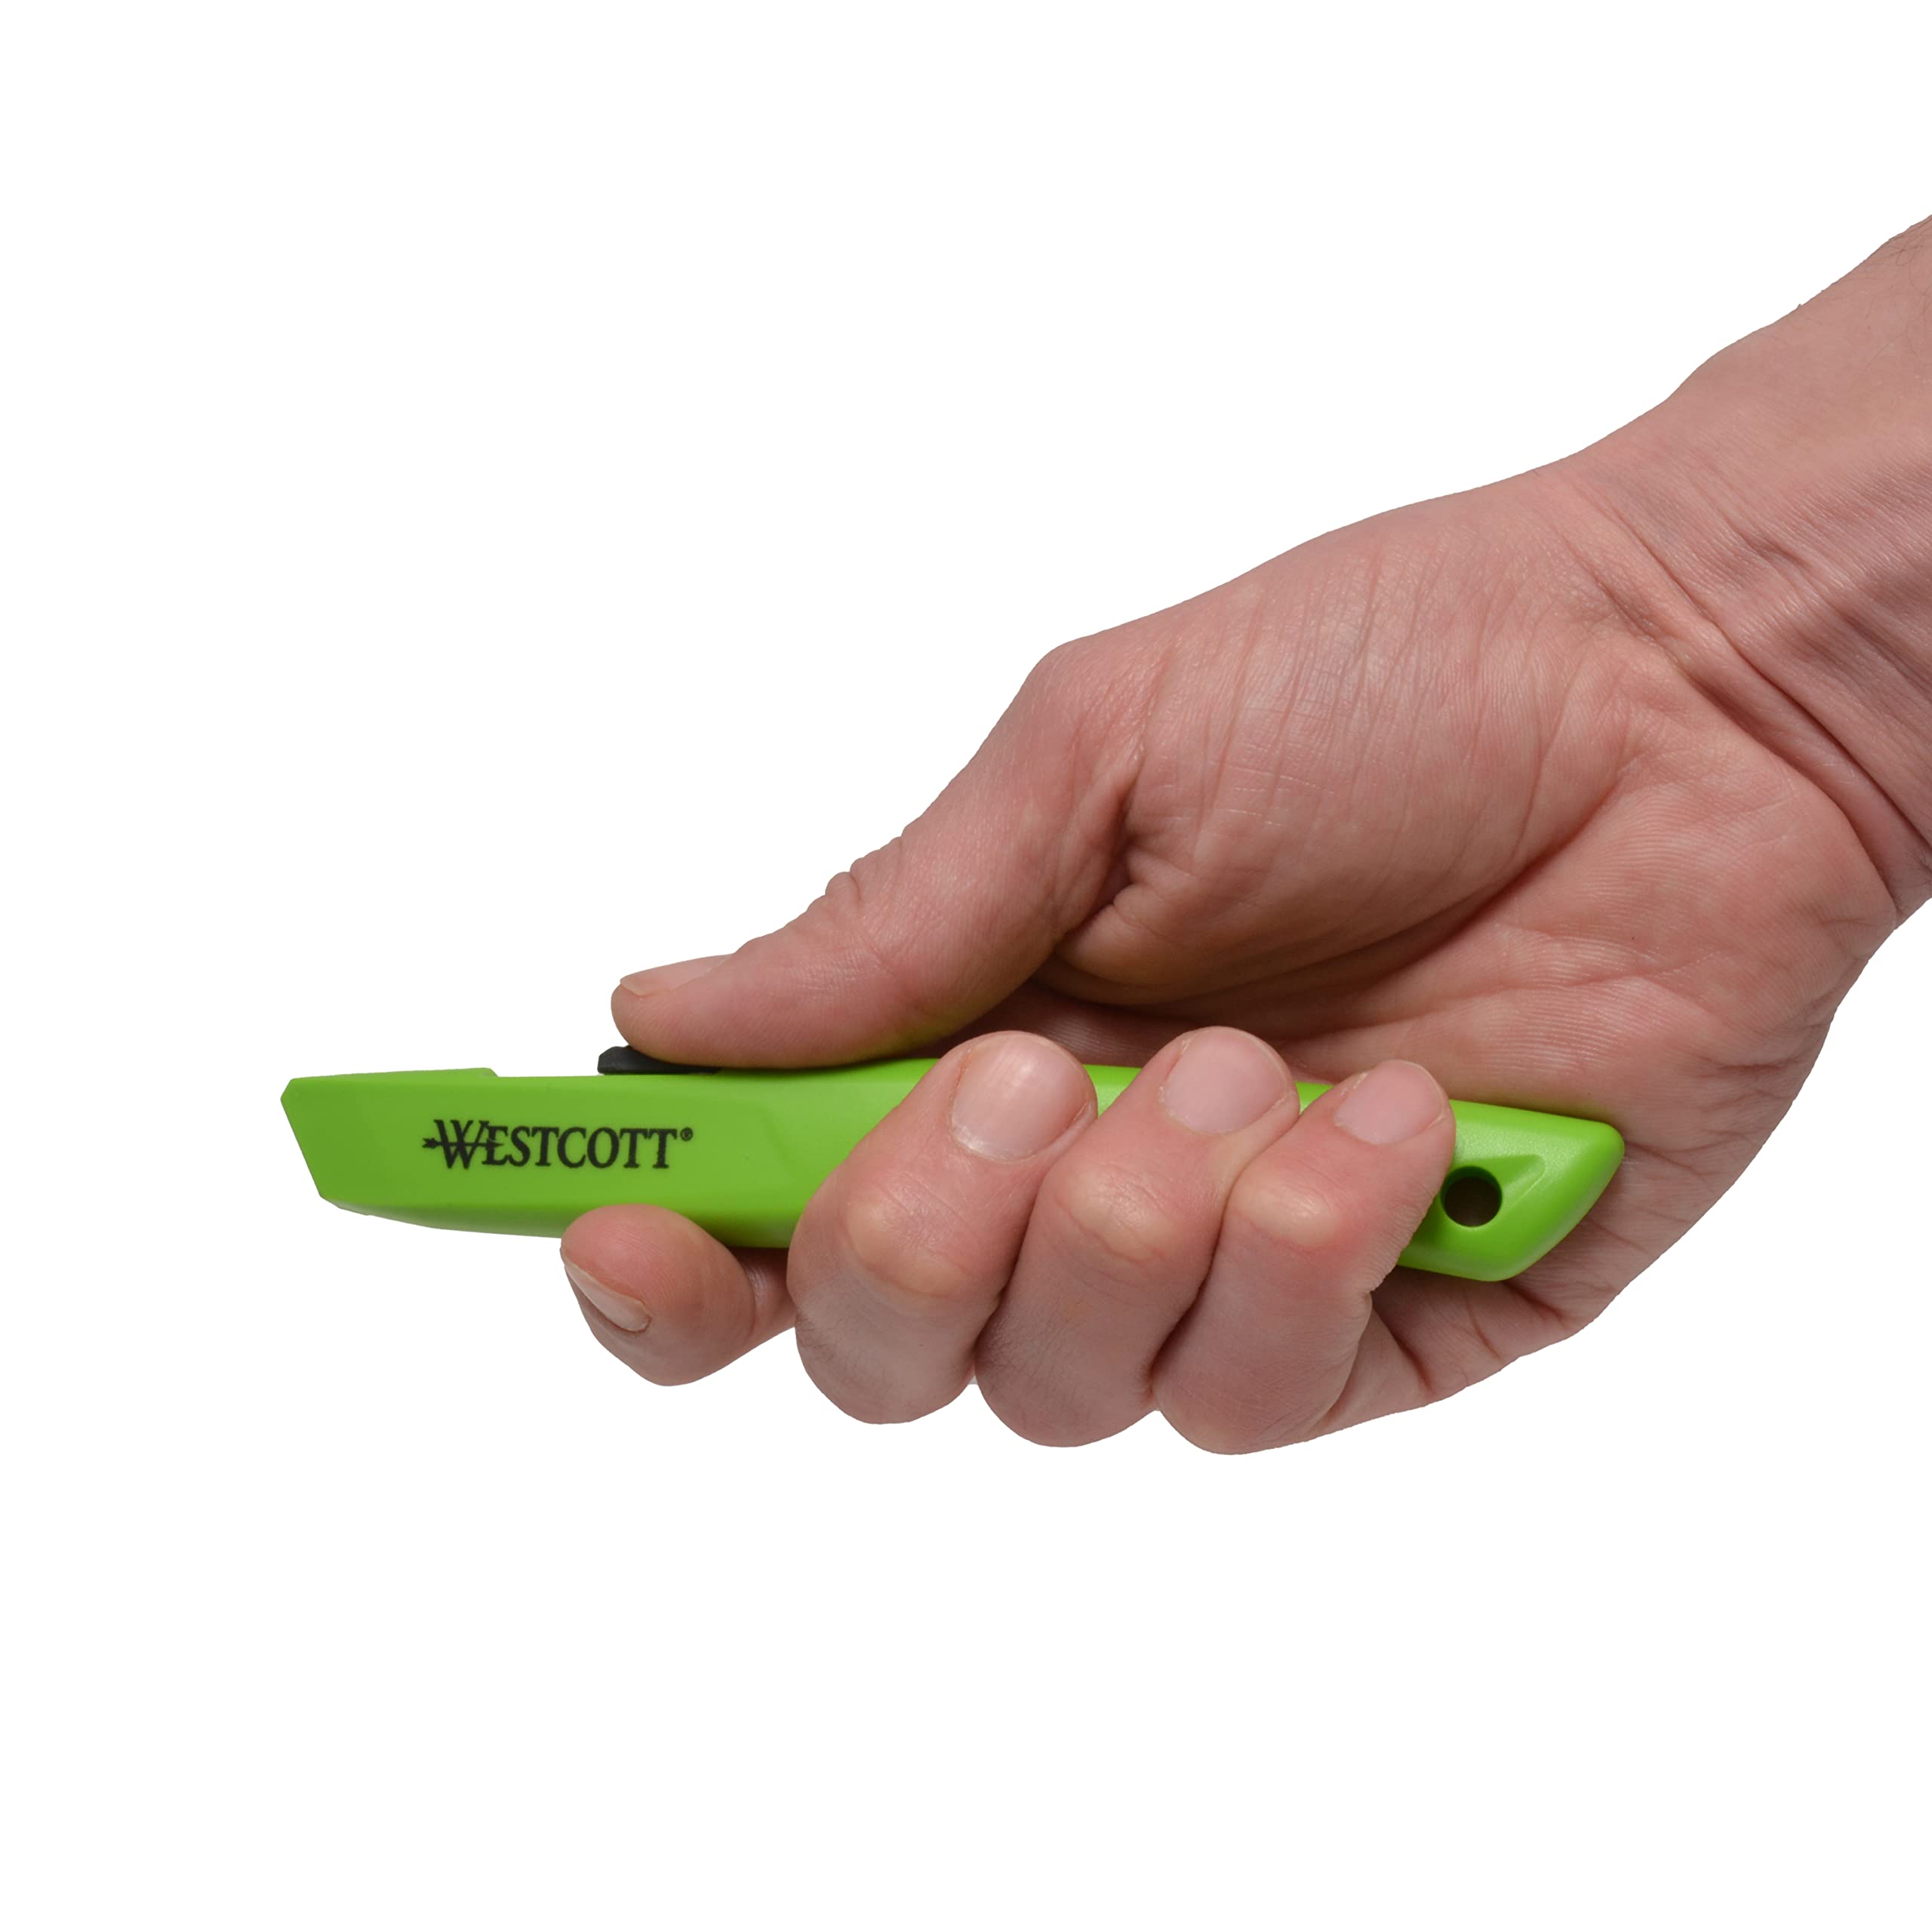 Westcott Full Size Safety Cutter Non Replaceable, Uses Slice Ceramic Blades